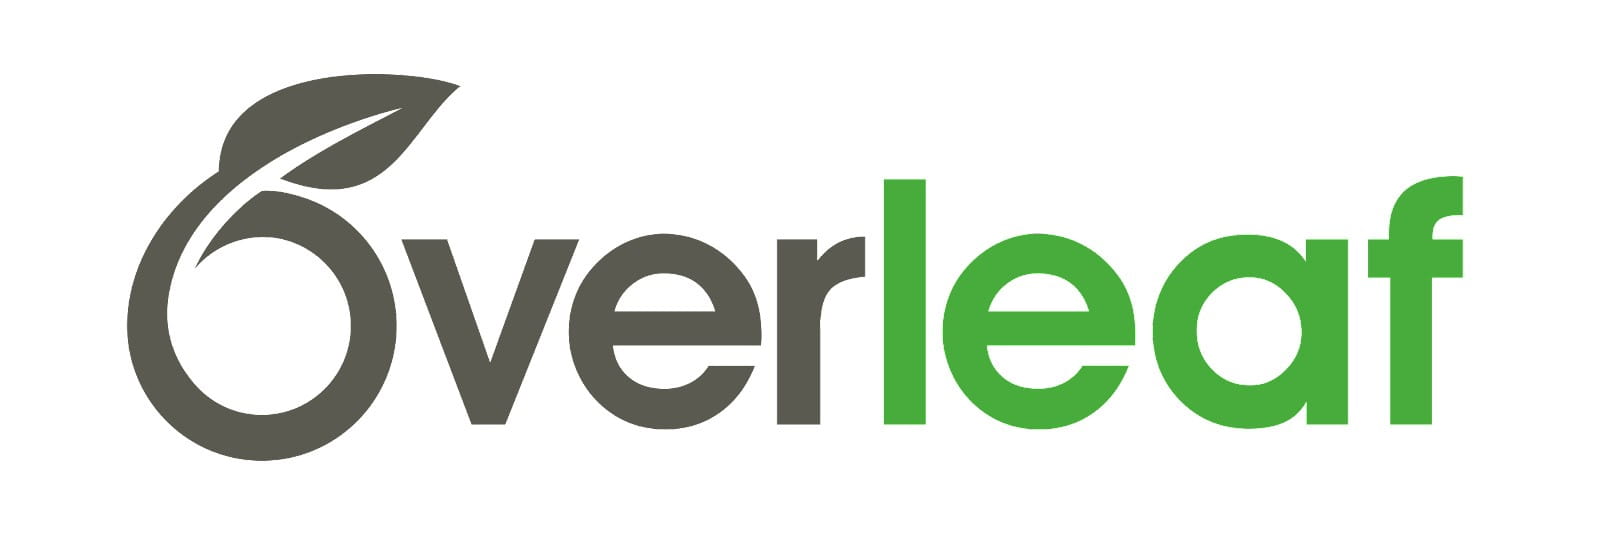 The word "Overleaf", with "Over" in black text with a small leaf coming out of the "O", and "leaf" in green text.